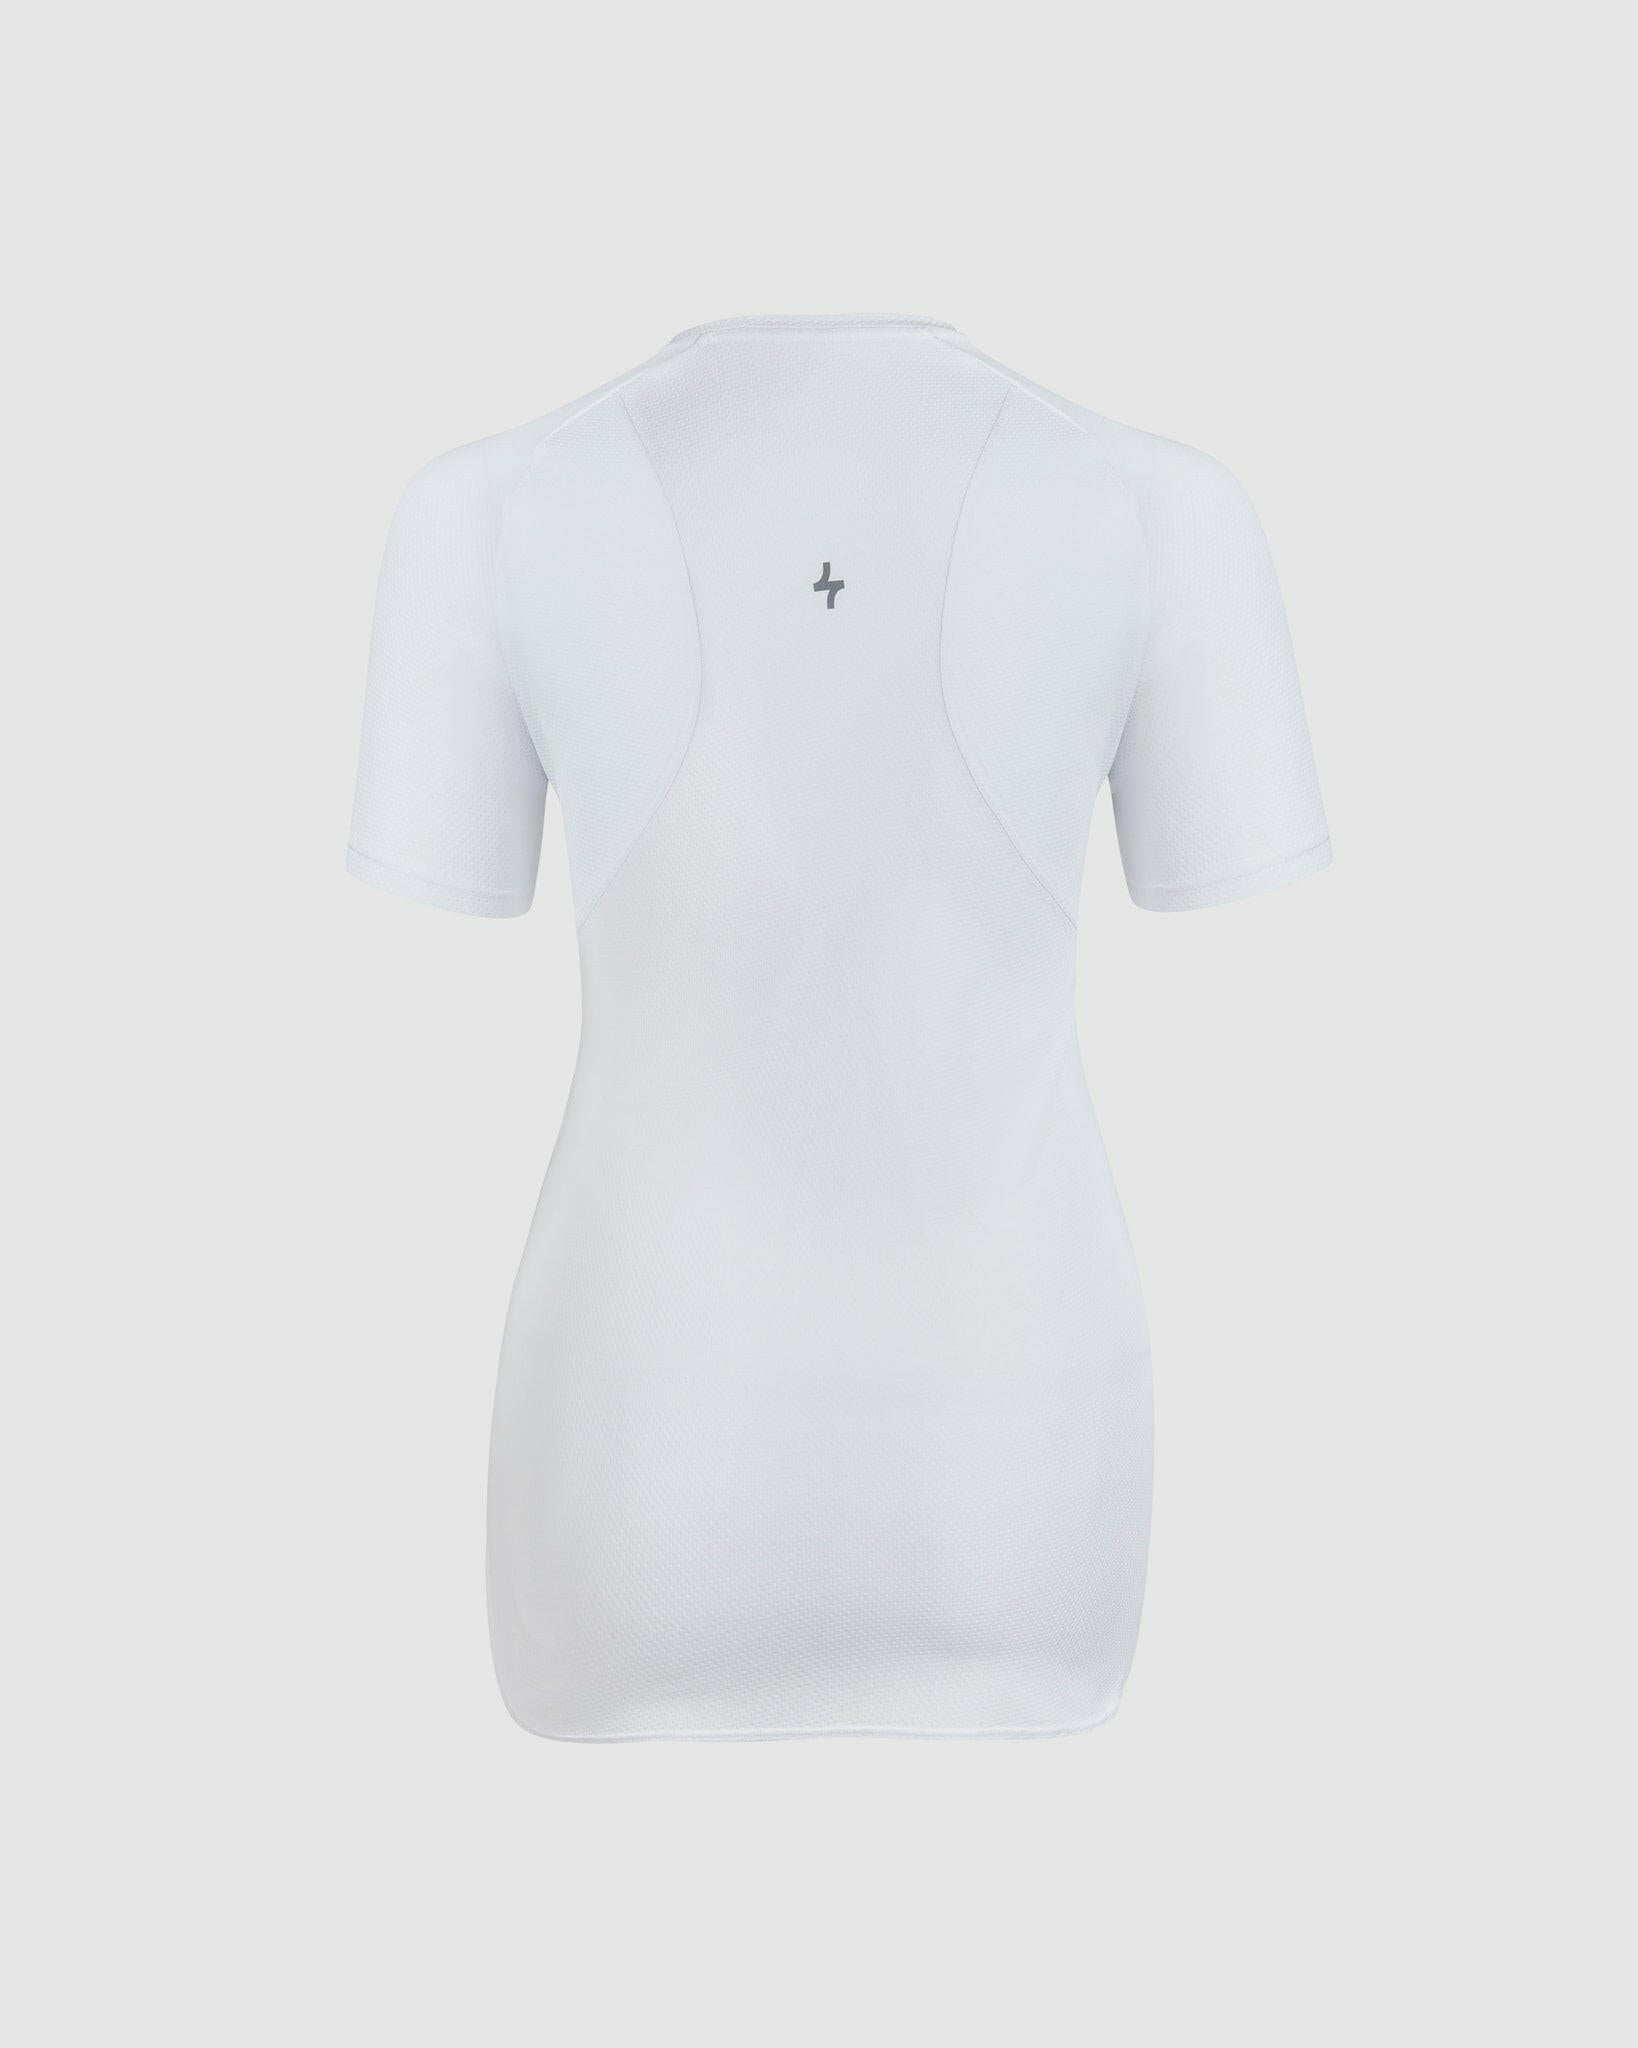 Back view of the short-sleeved, BREATHE T-SHIRT by qynda designed for running sports and optimized for breathability is displayed on a mannequin torso against a neutral background.